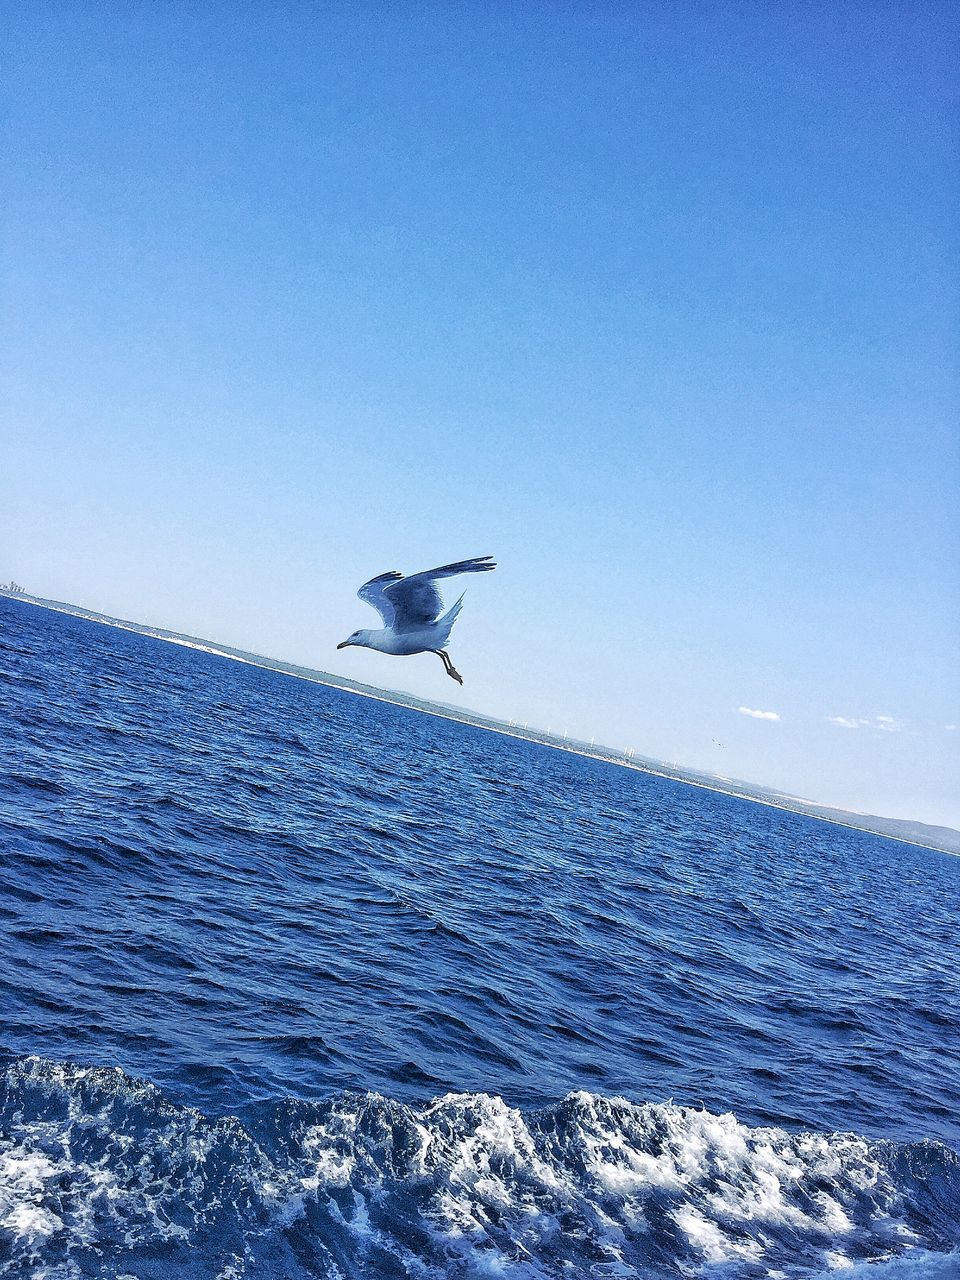 sea, blue, flying, water, clear sky, animal themes, one animal, copy space, waterfront, horizon over water, bird, animals in the wild, nature, wildlife, beauty in nature, scenics, mode of transport, mid-air, transportation, seagull